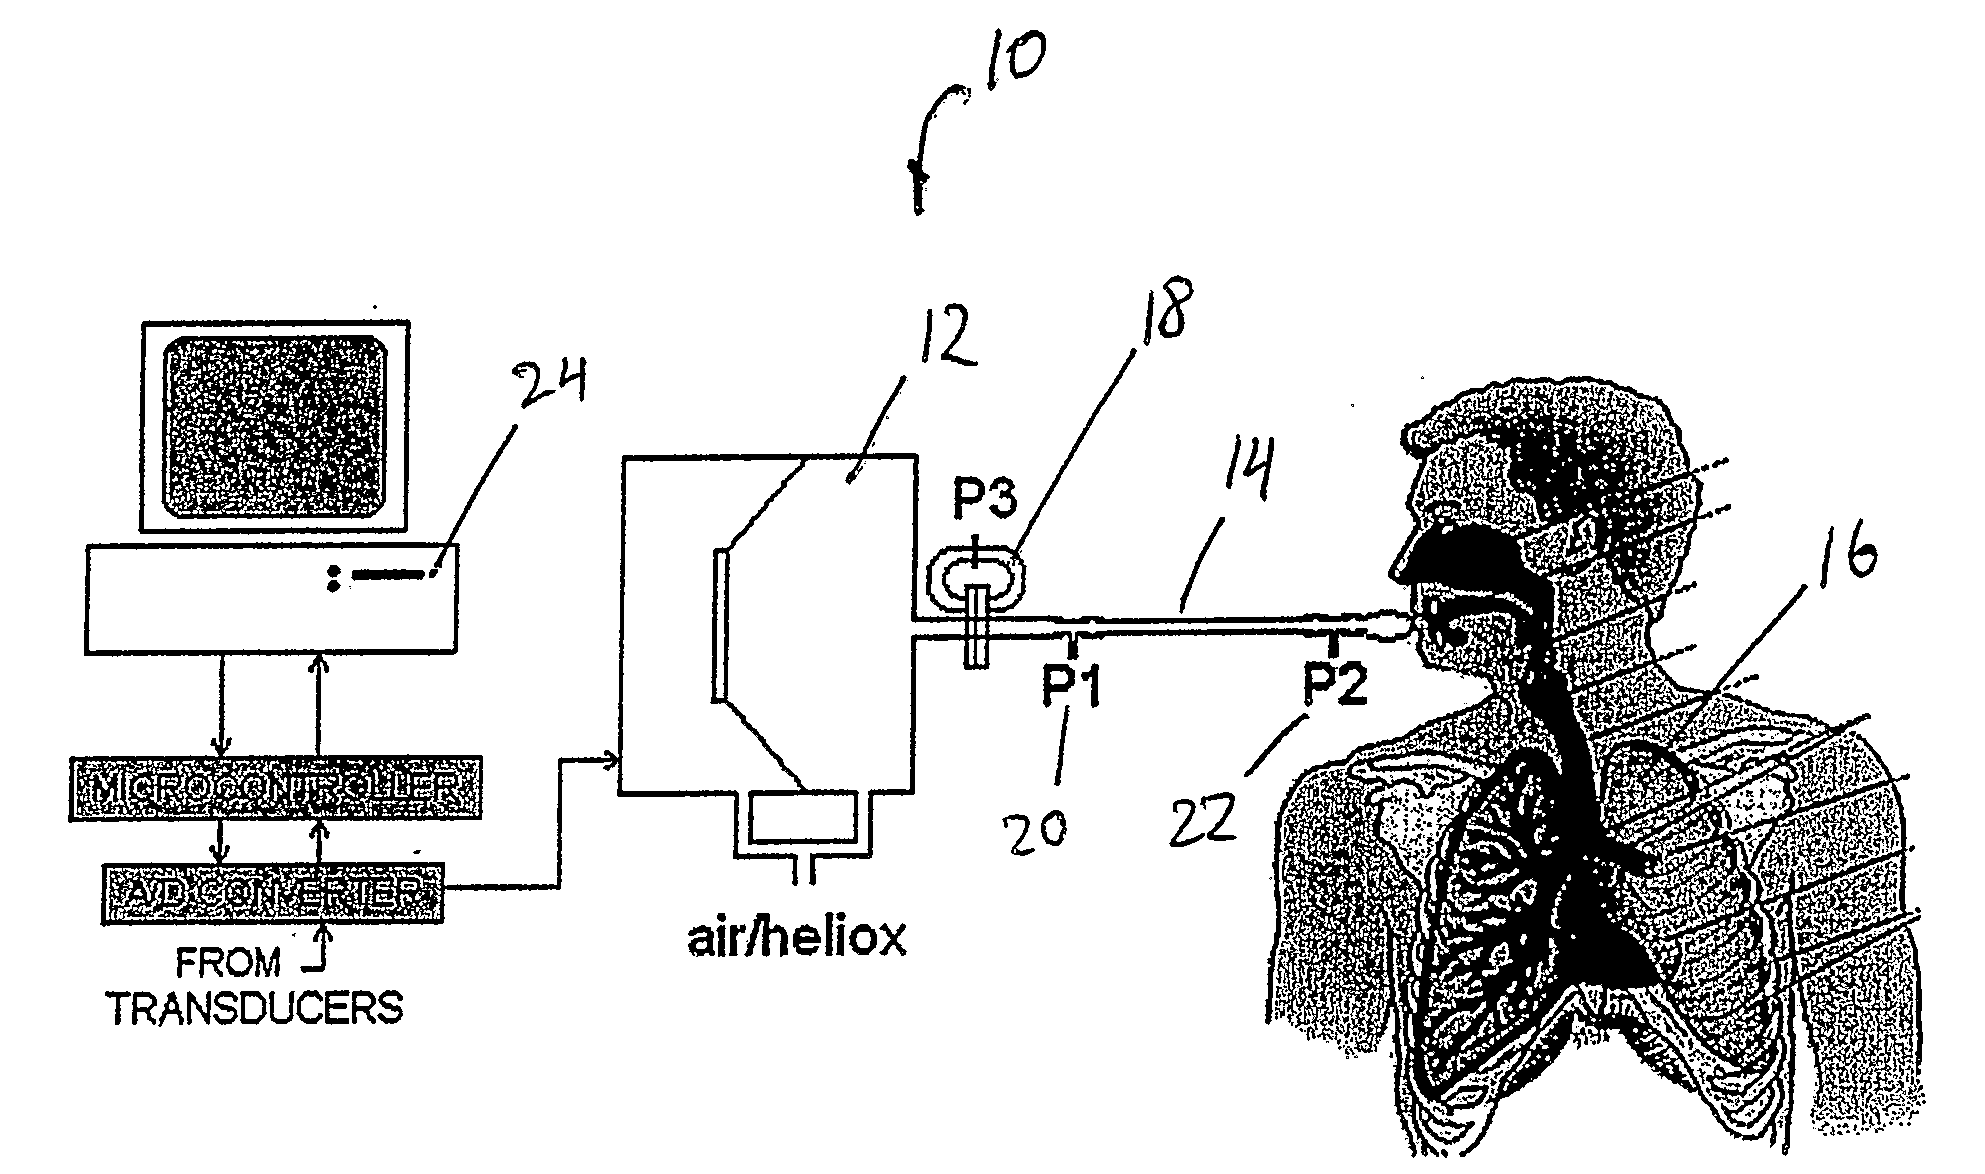 Method of measuring an acoustic impedance of a respiratory system and diagnosing a respiratory disease or disorder or monitoring treatment of same